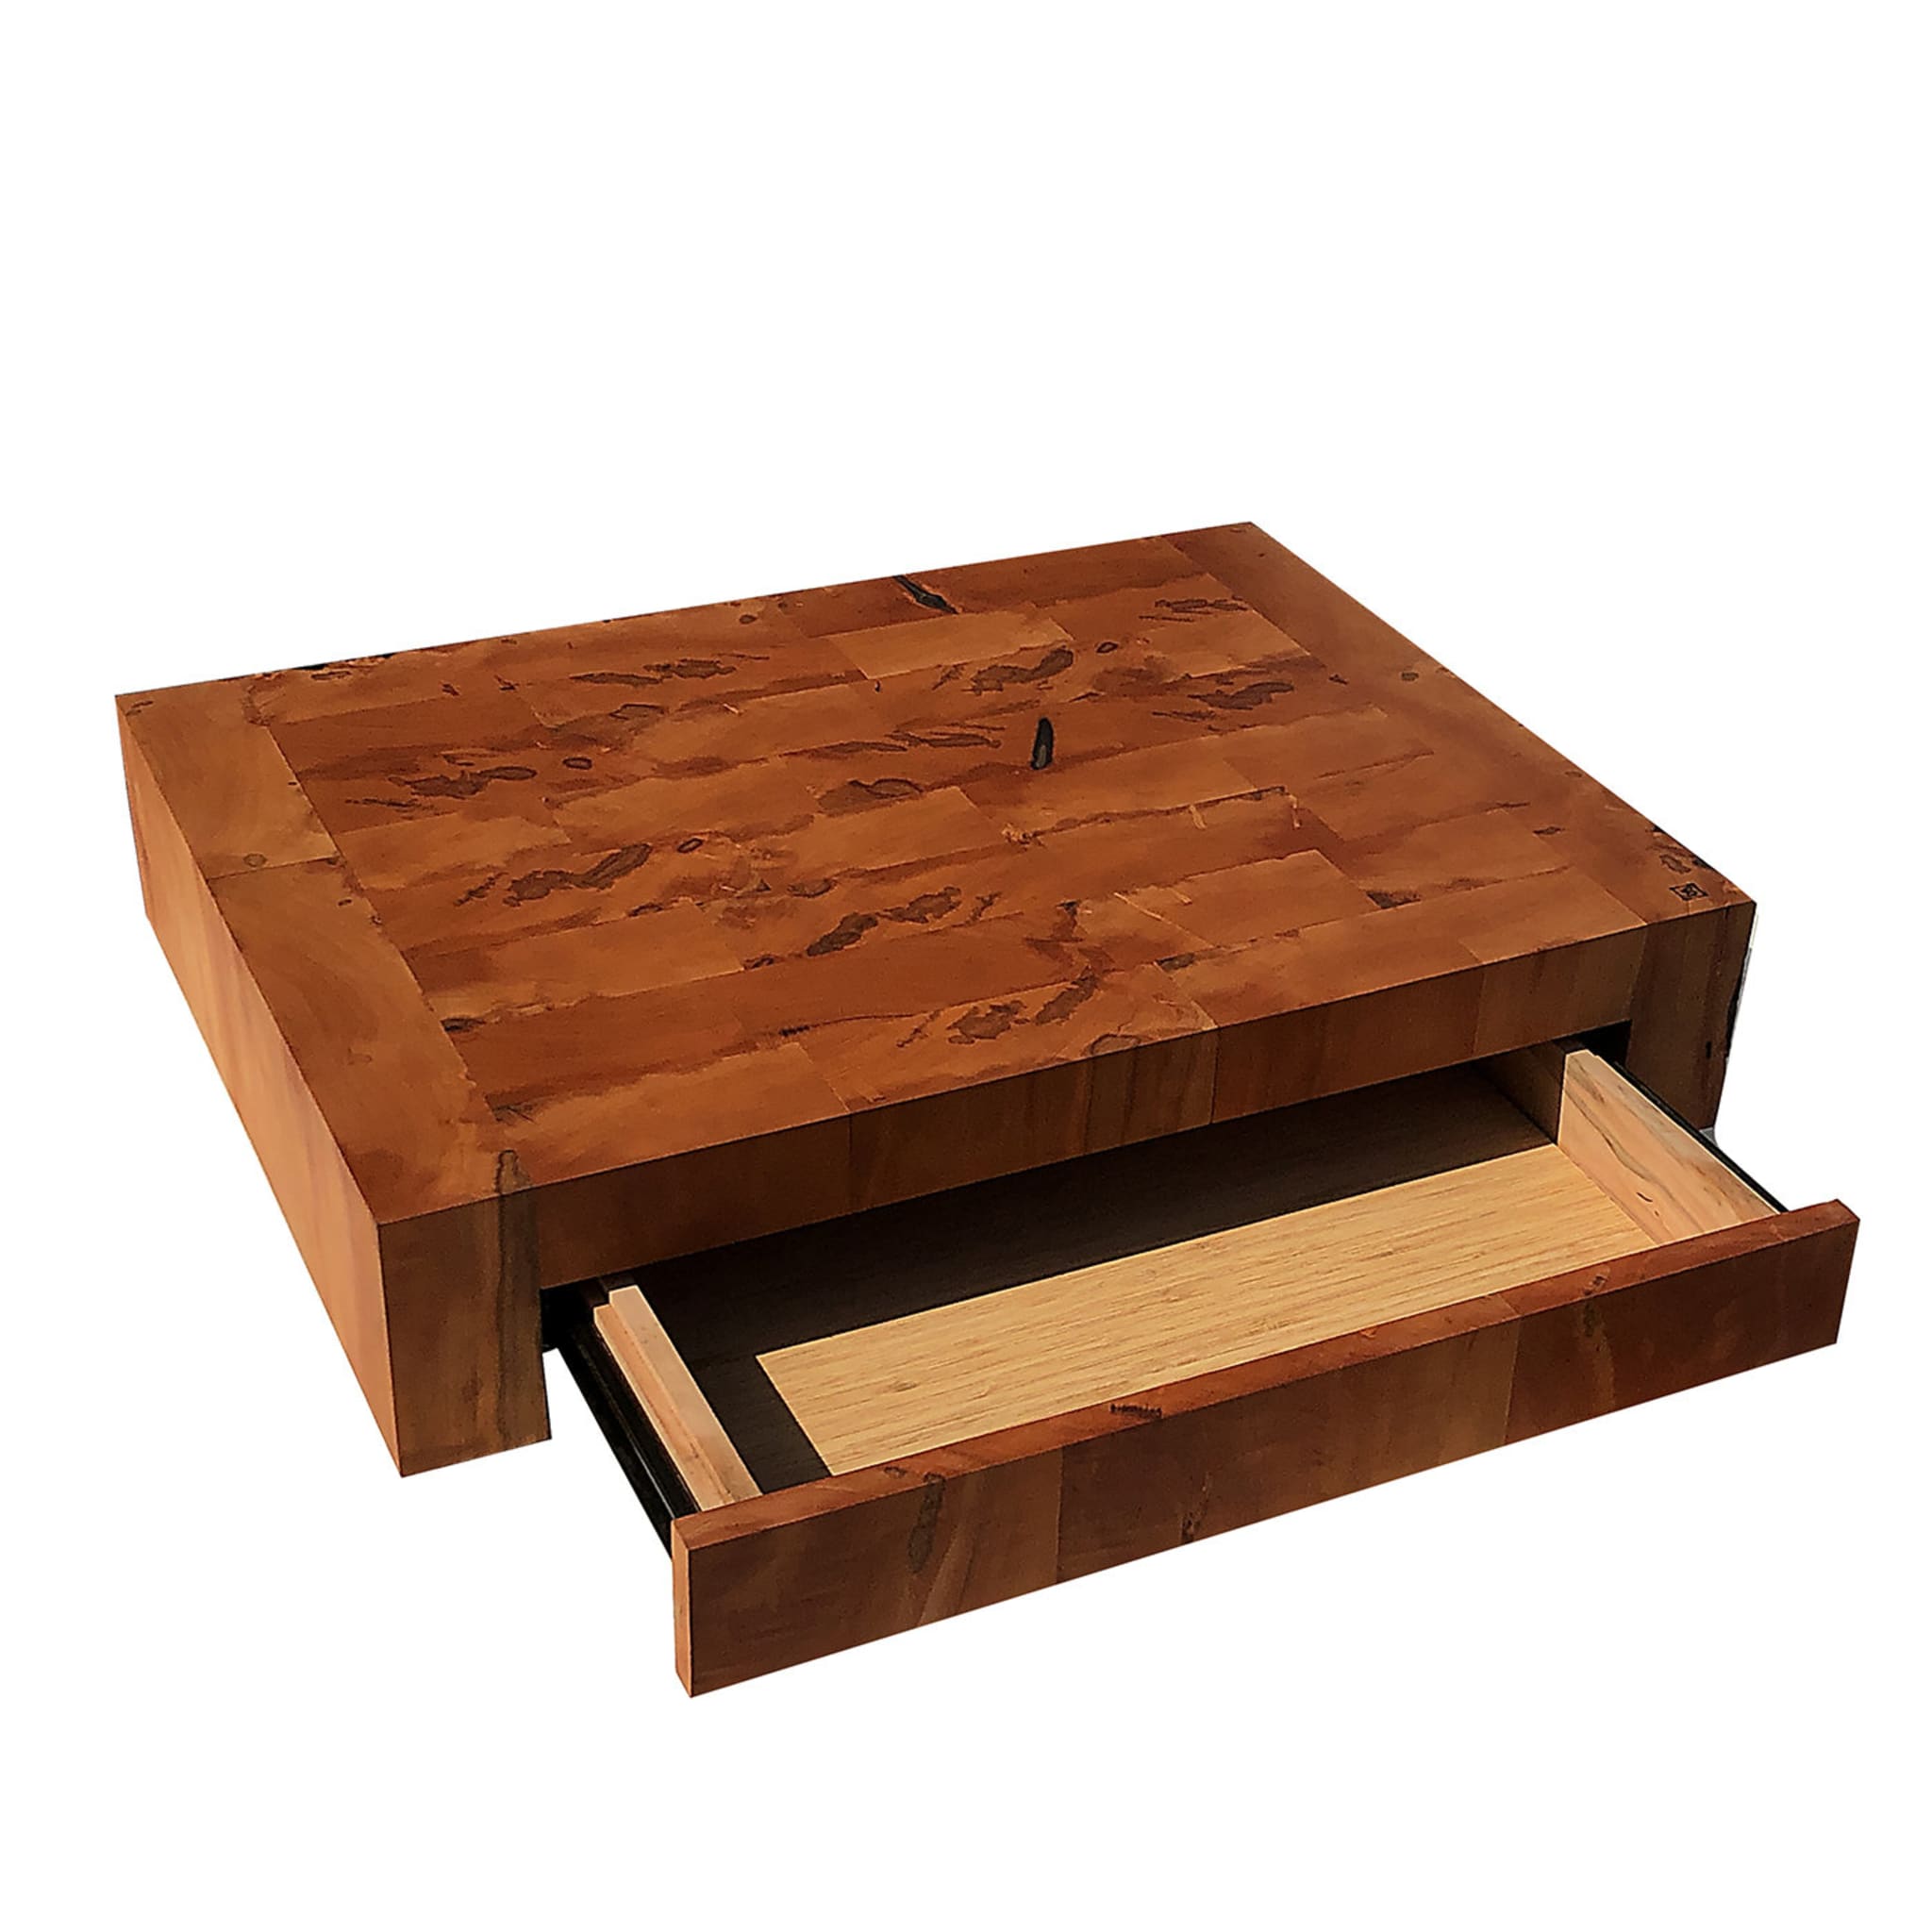 Pear Wood Cutting Board with Drawer - Alternative view 3